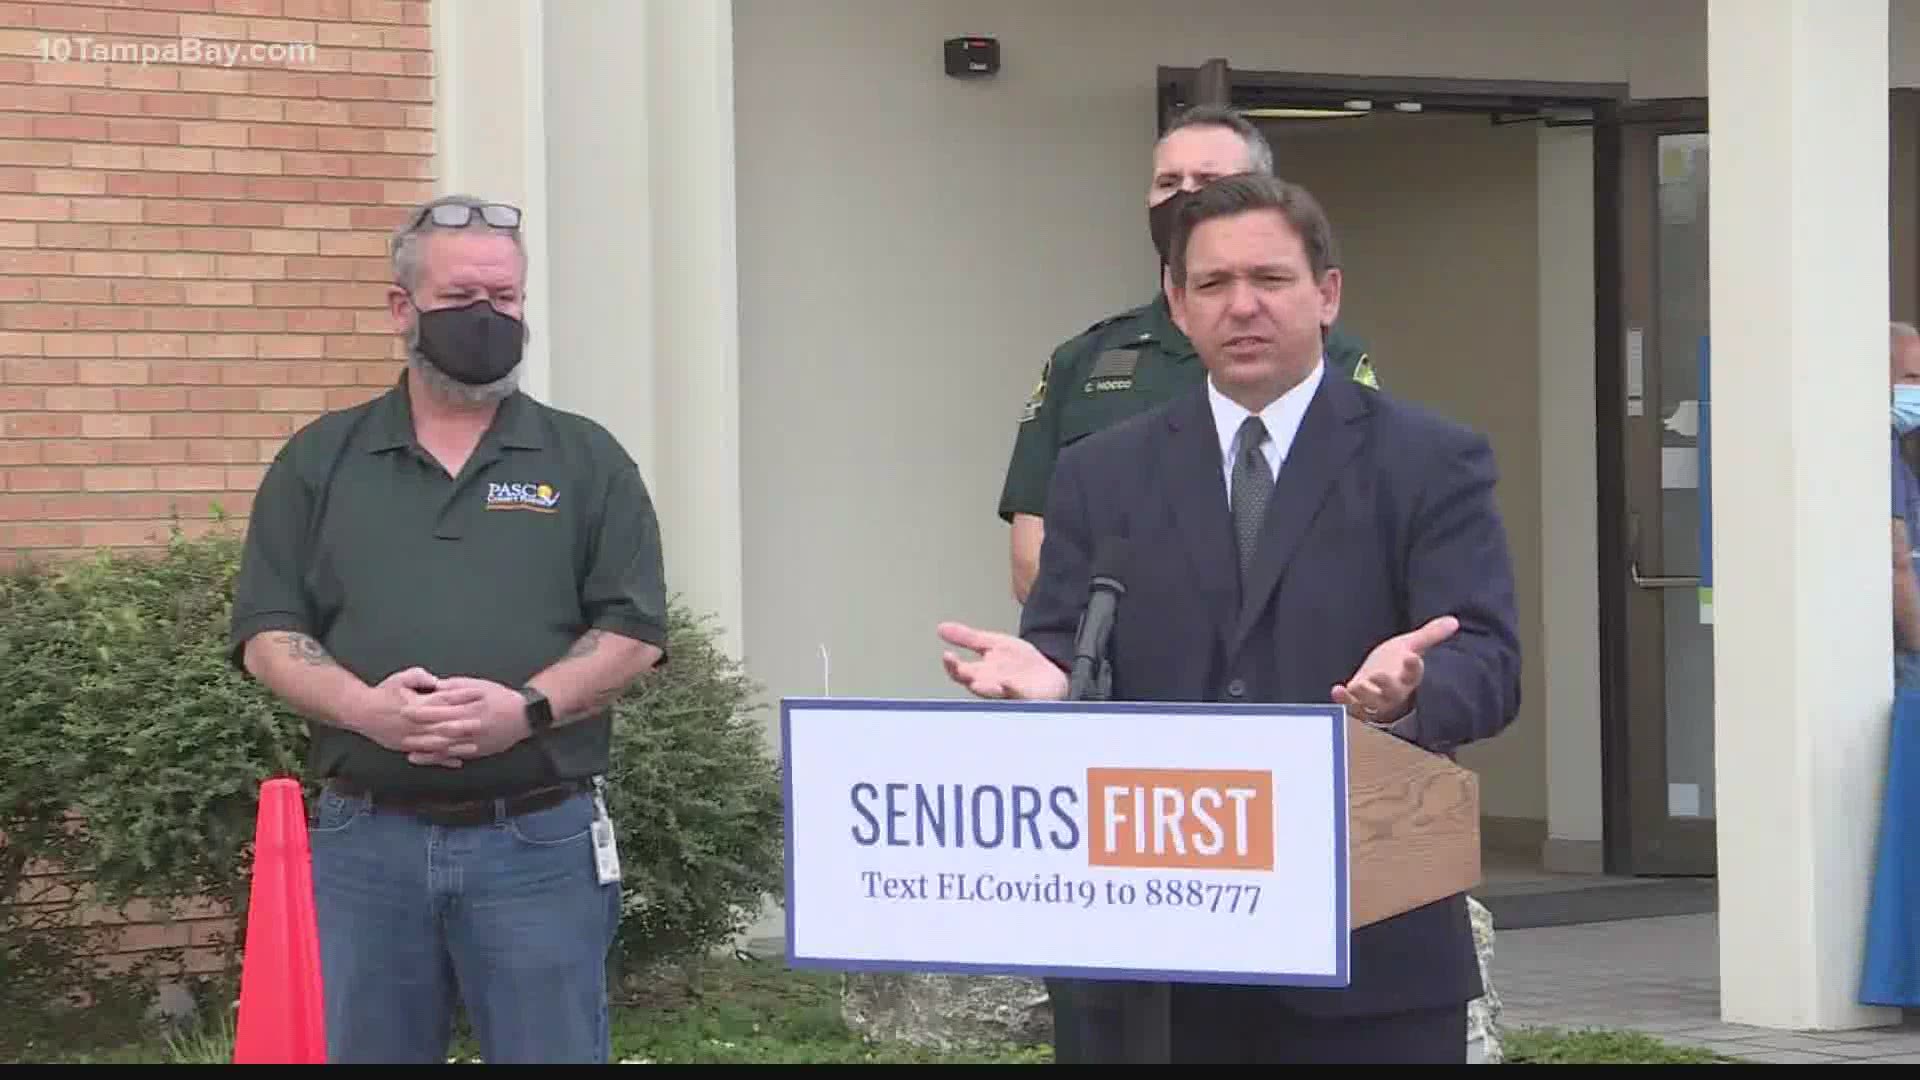 Florida Gov. Ron DeSantis said he's leaving the determination up to doctors who must sign off on their patients' forms.